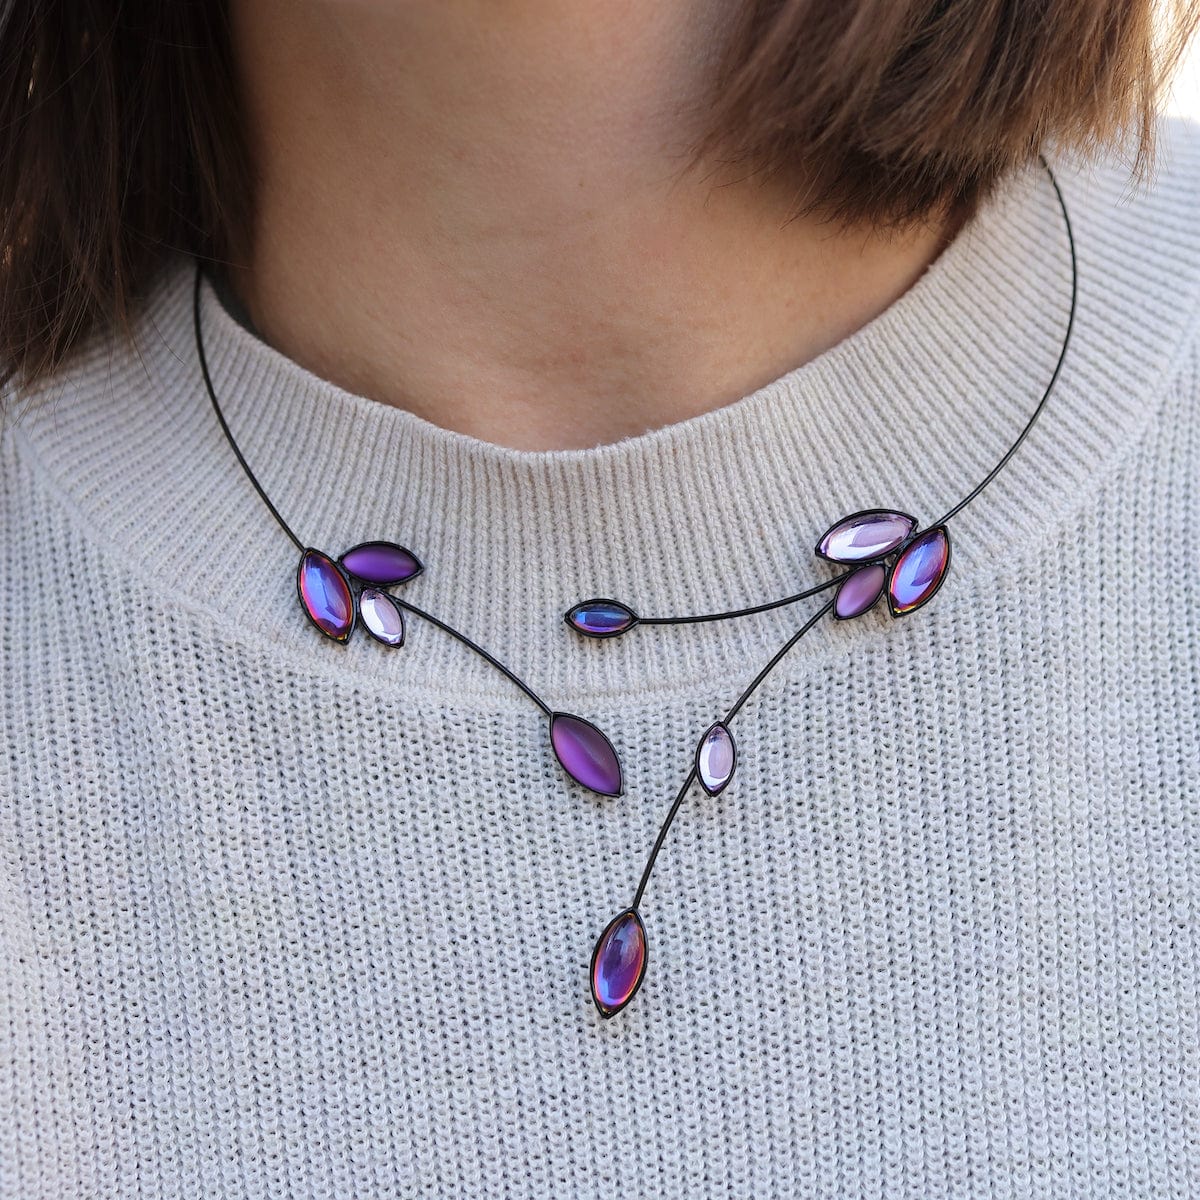 NKL Branches & Leaves Choker Necklace ~ Iridescent Greens